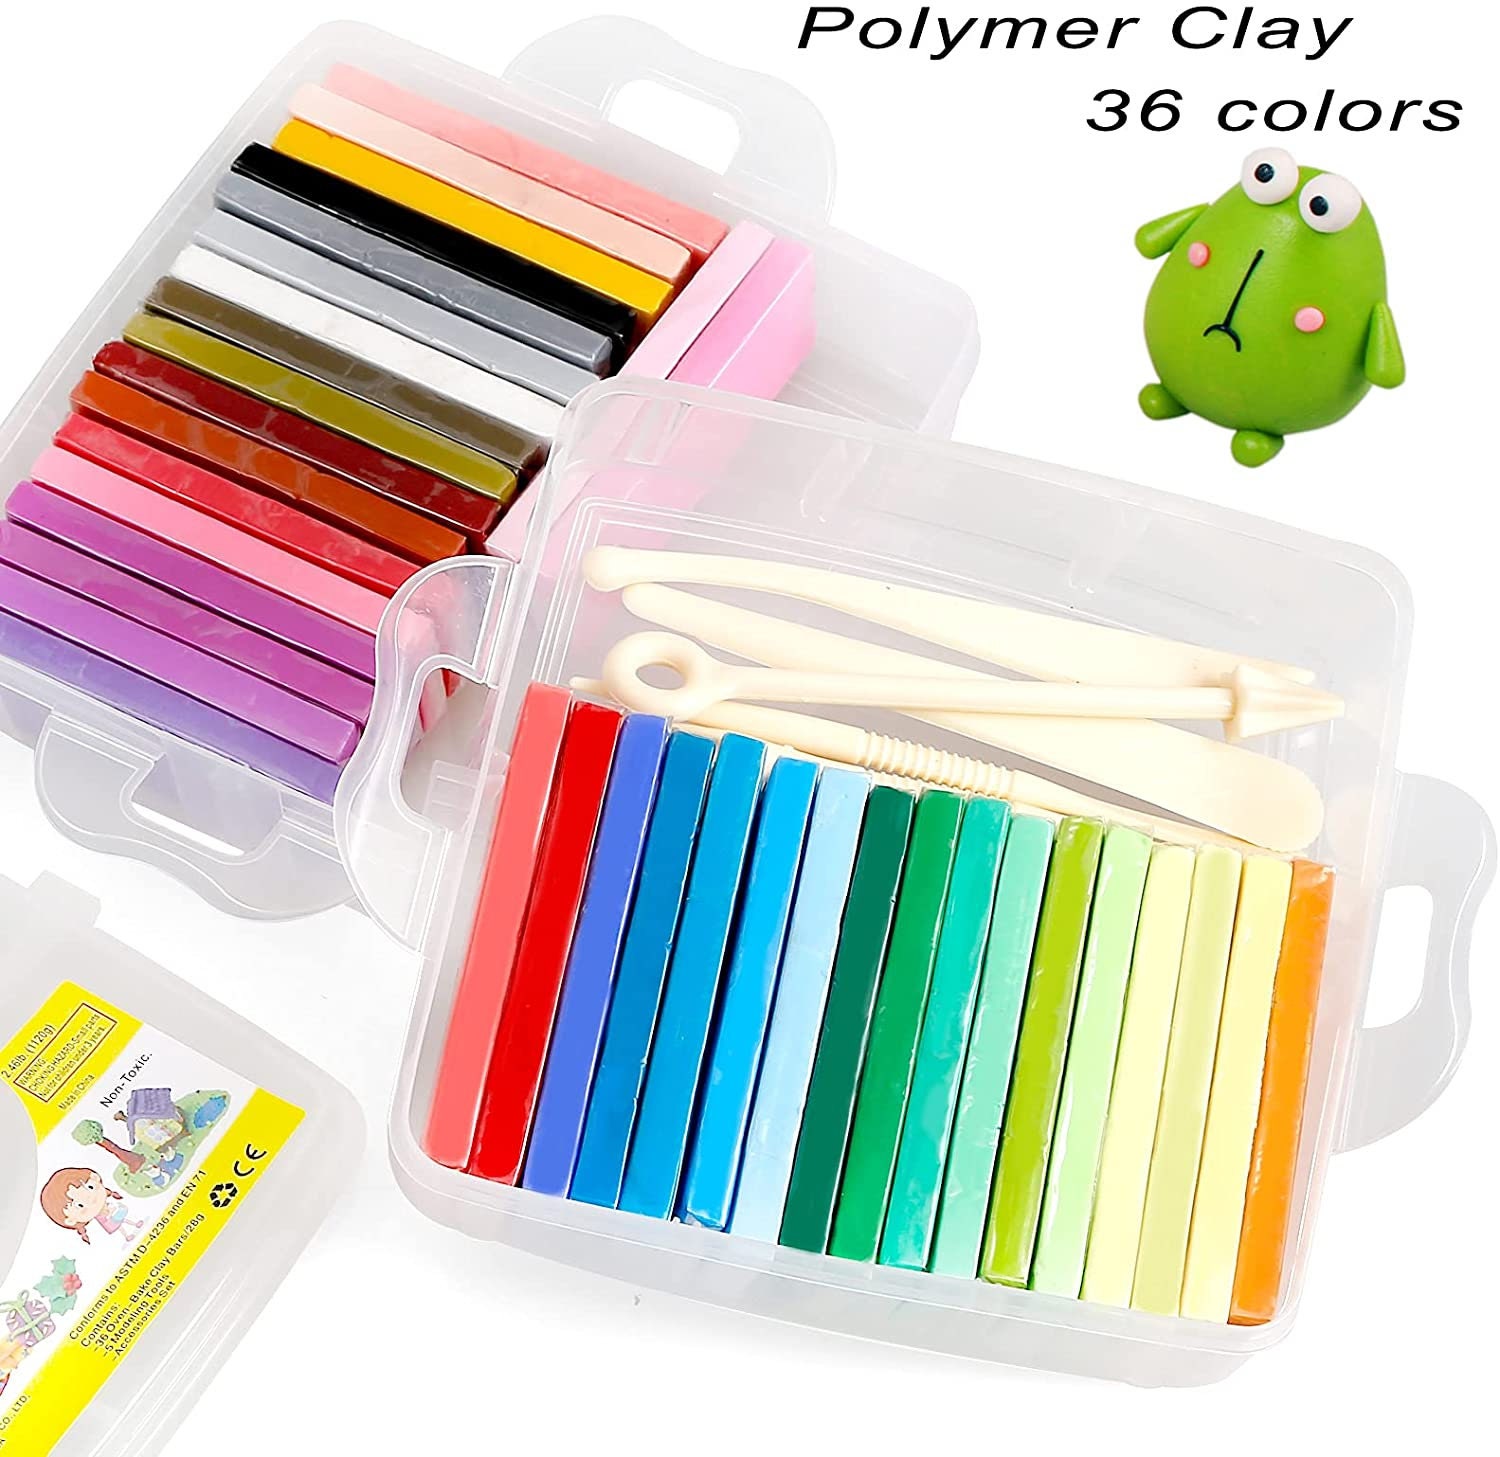 Polymer Clay Starter Kit 36 Colors Oven Bake Clay Baking Modeling